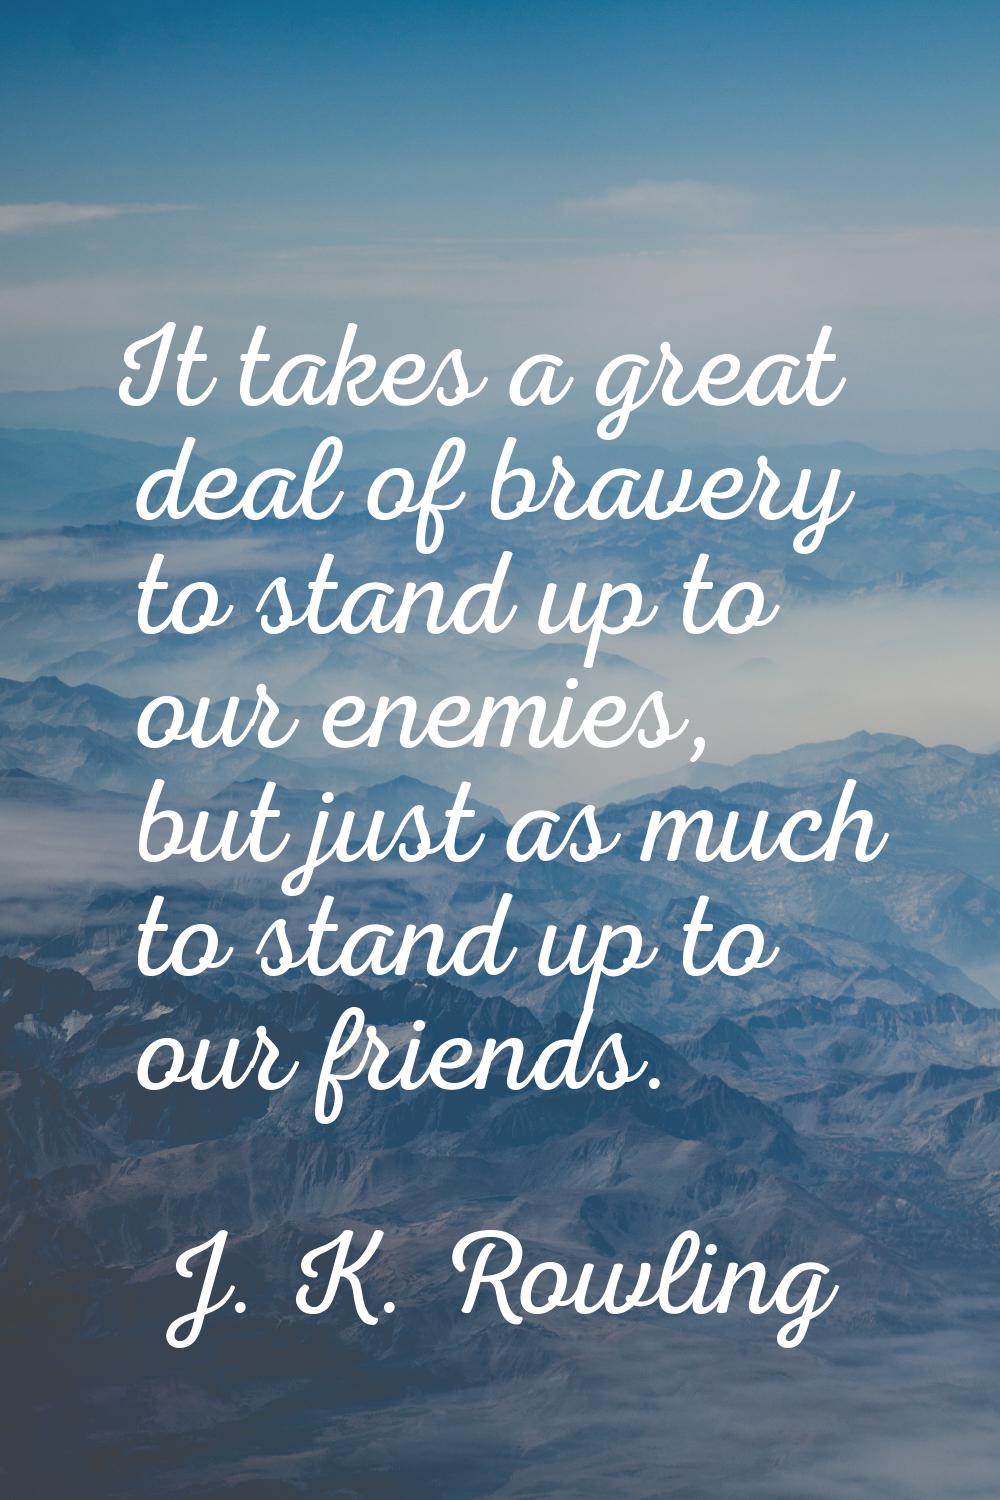 It takes a great deal of bravery to stand up to our enemies, but just as much to stand up to our fr